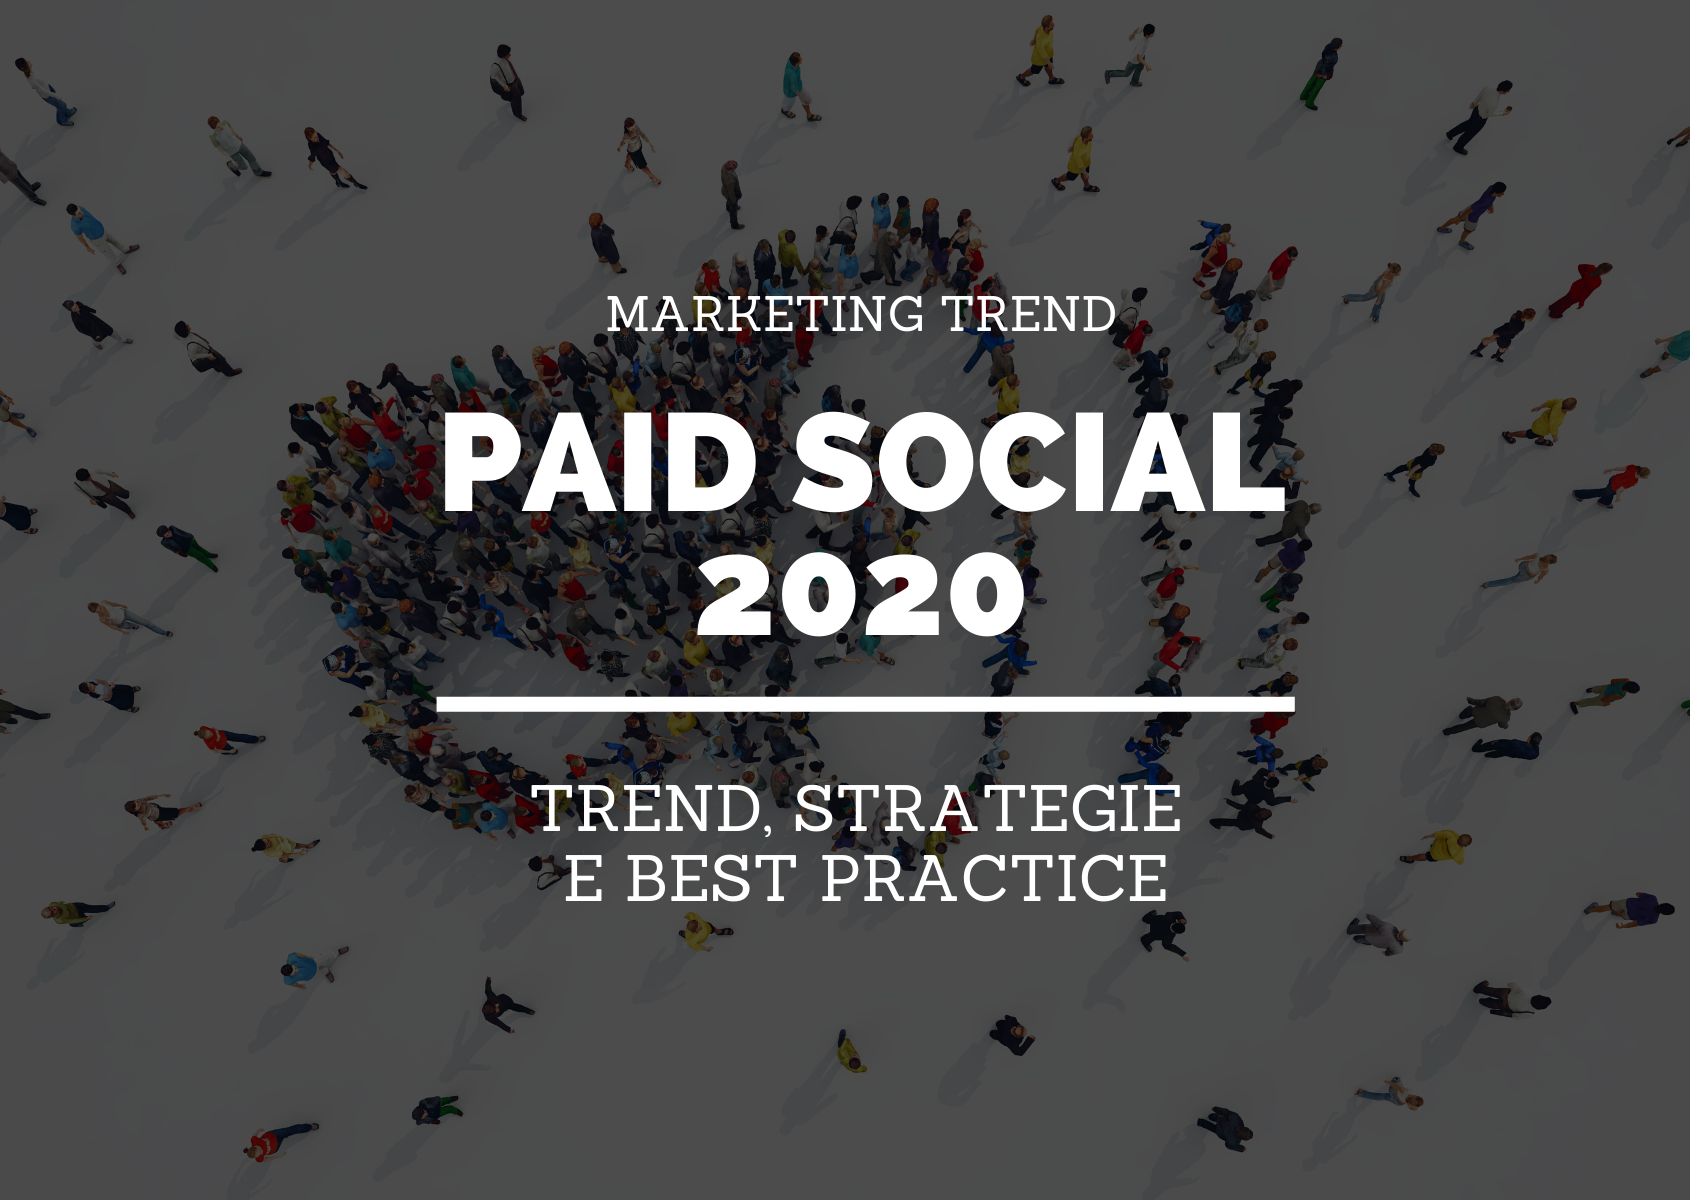 PAID SOCIAL 2020 TREND